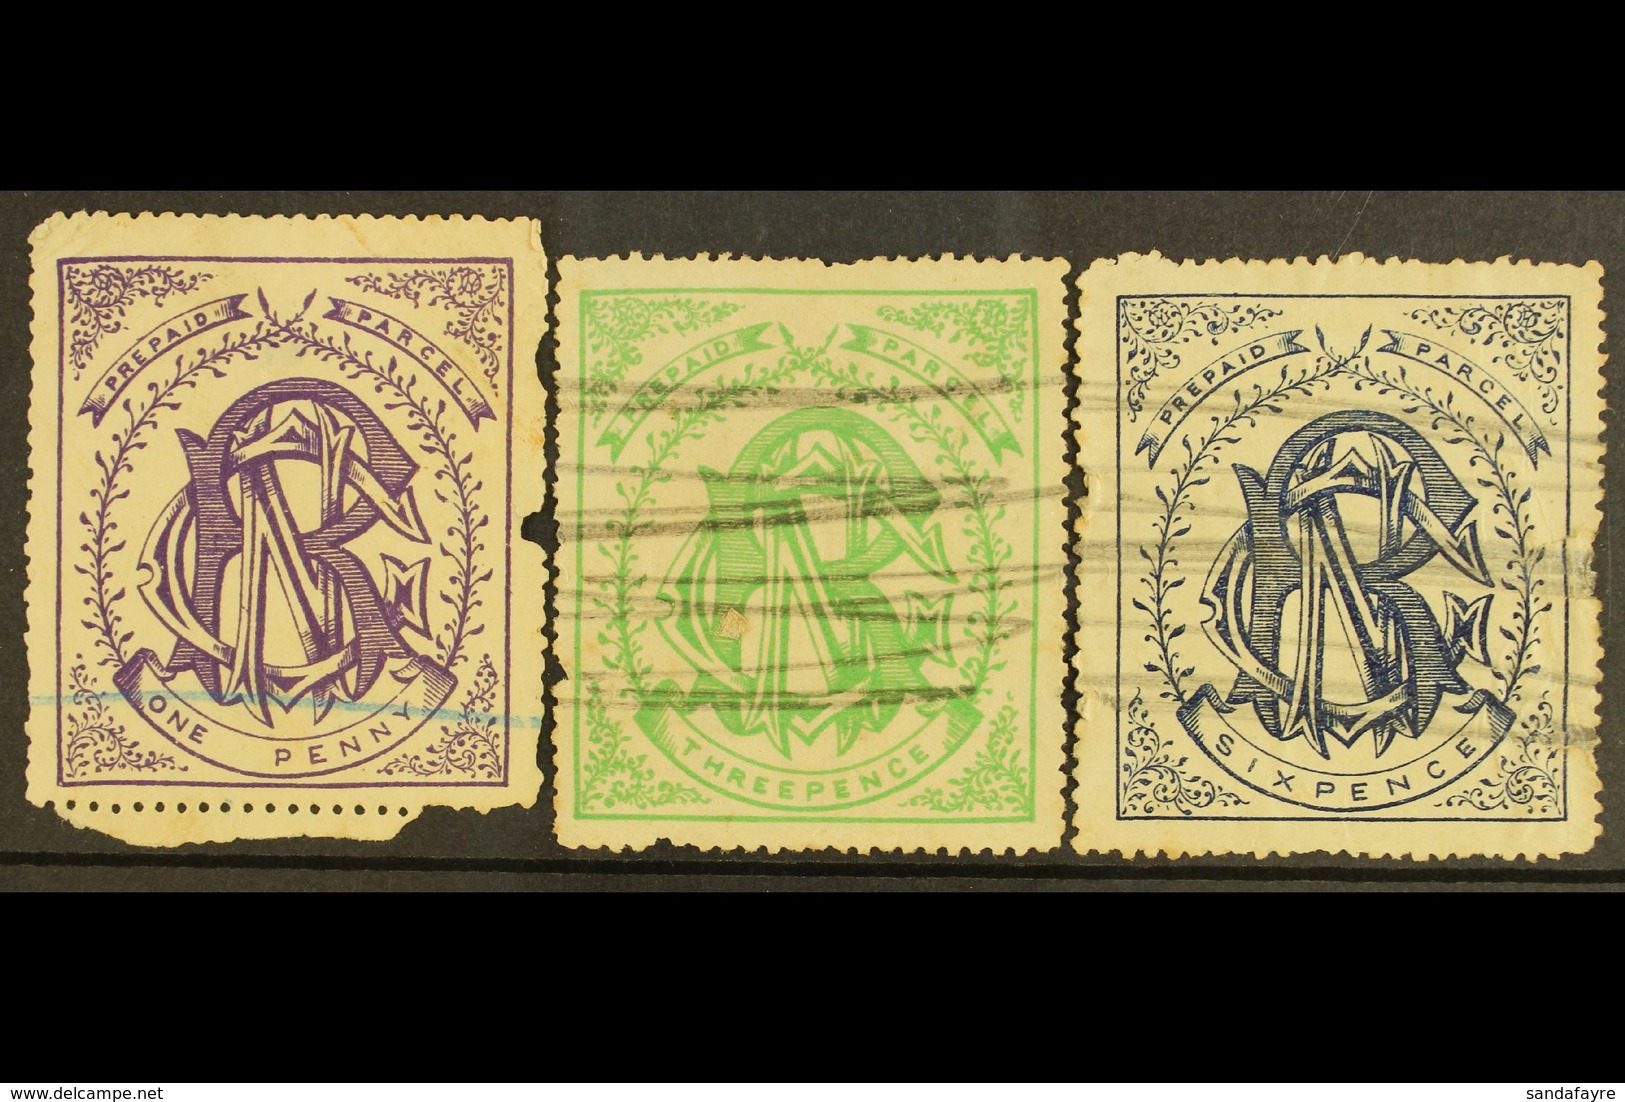 NATAL NATAL GOVERNMENT RAILWAY 1880 1d Violet, 3d Green & 6d Blue, Used With Faults, A Rare Trio (3 Stamps) For More Ima - Non Classés